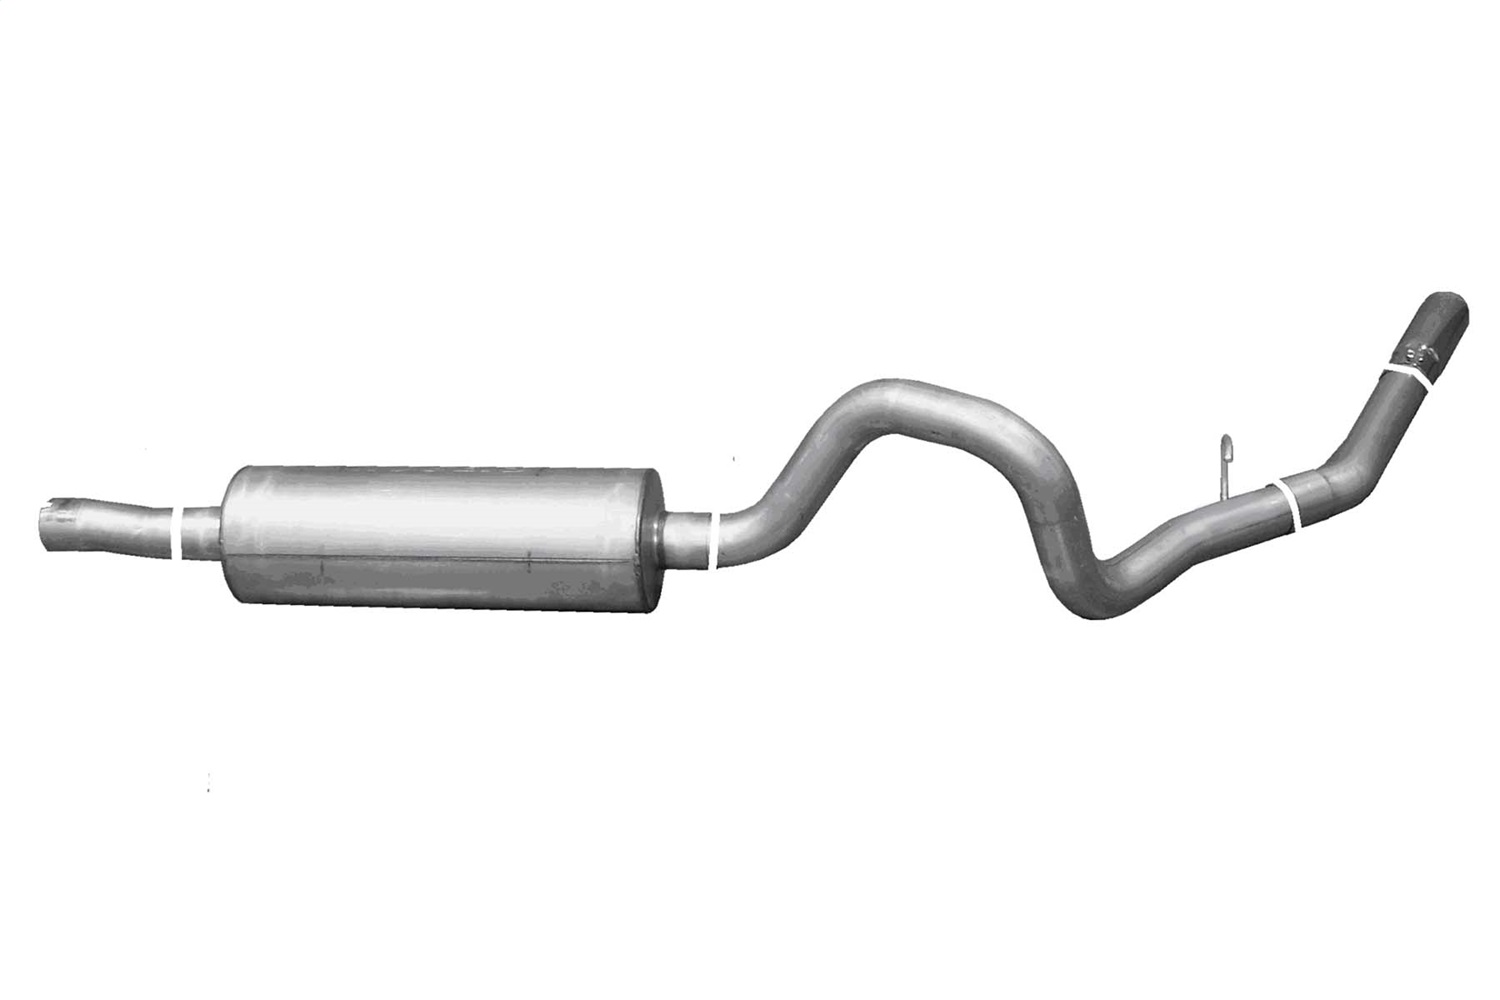 Gibson Performance 619995 Cat-Back Single Exhaust System Fits 00-05 Excursion